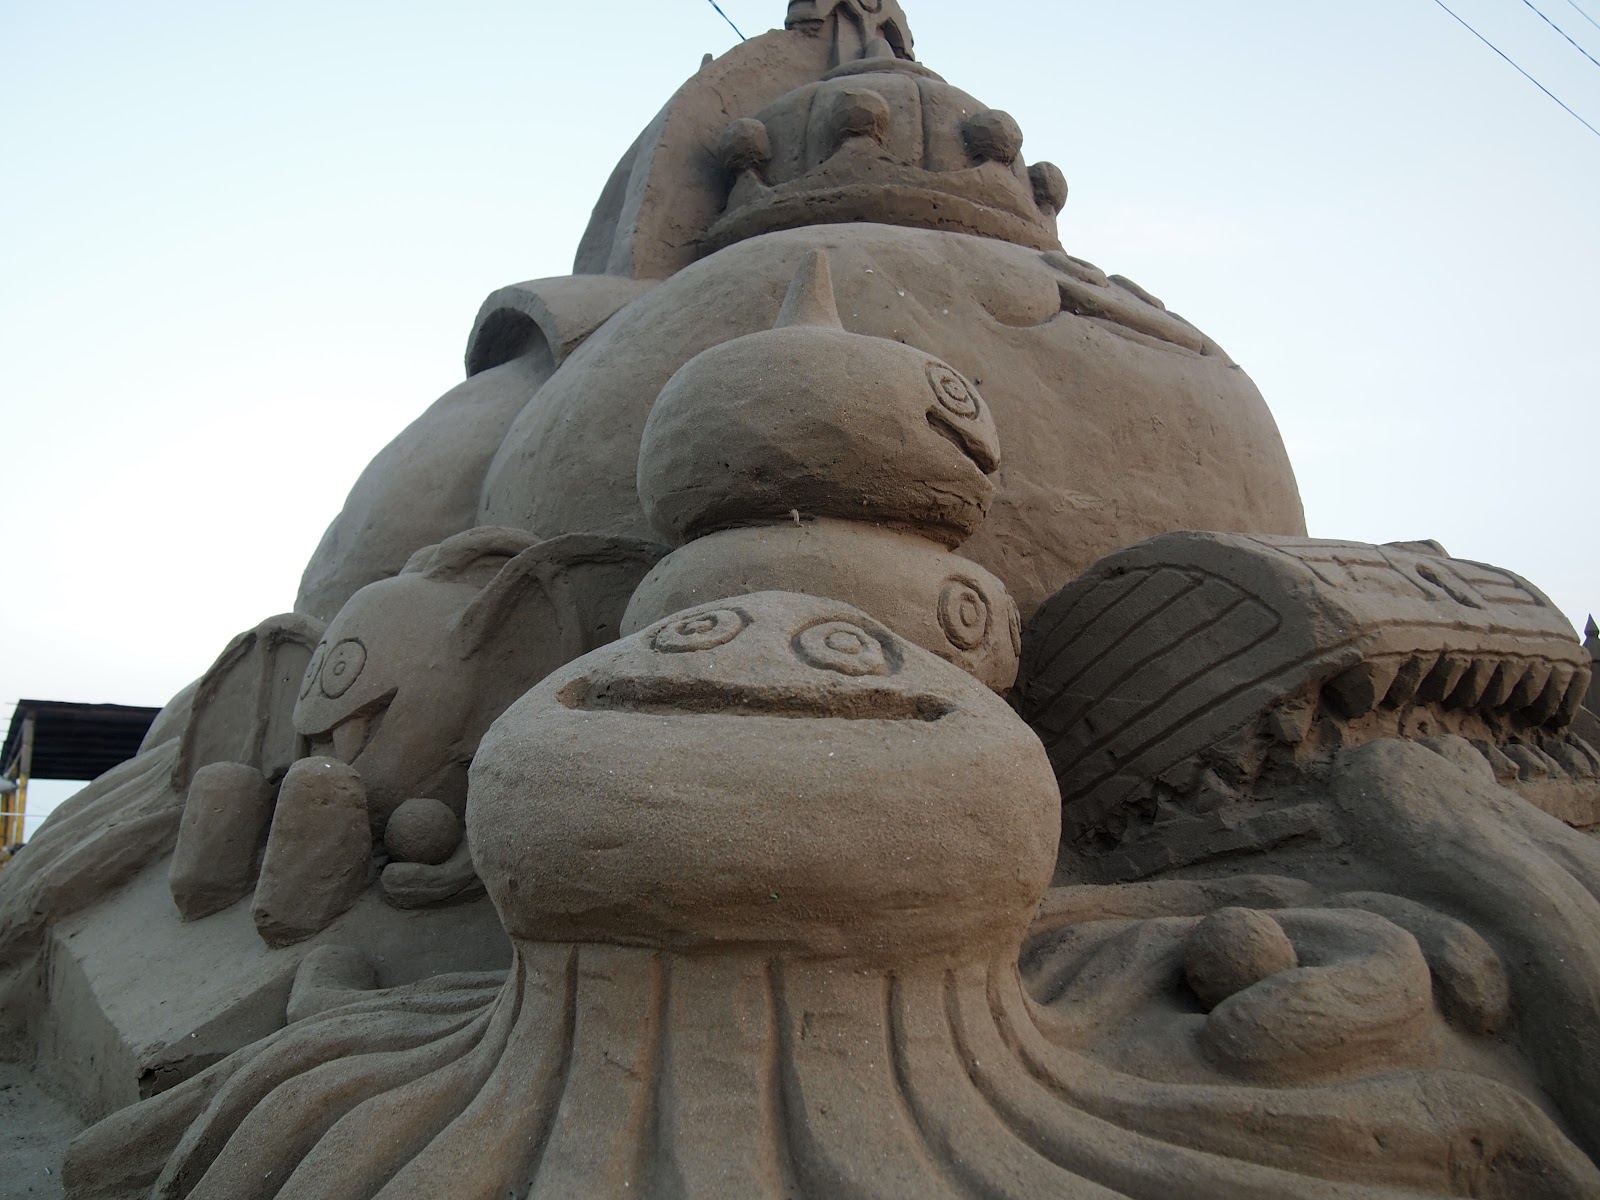 Japanese Anime Comes Alive With These Amazing Sand Sculptures